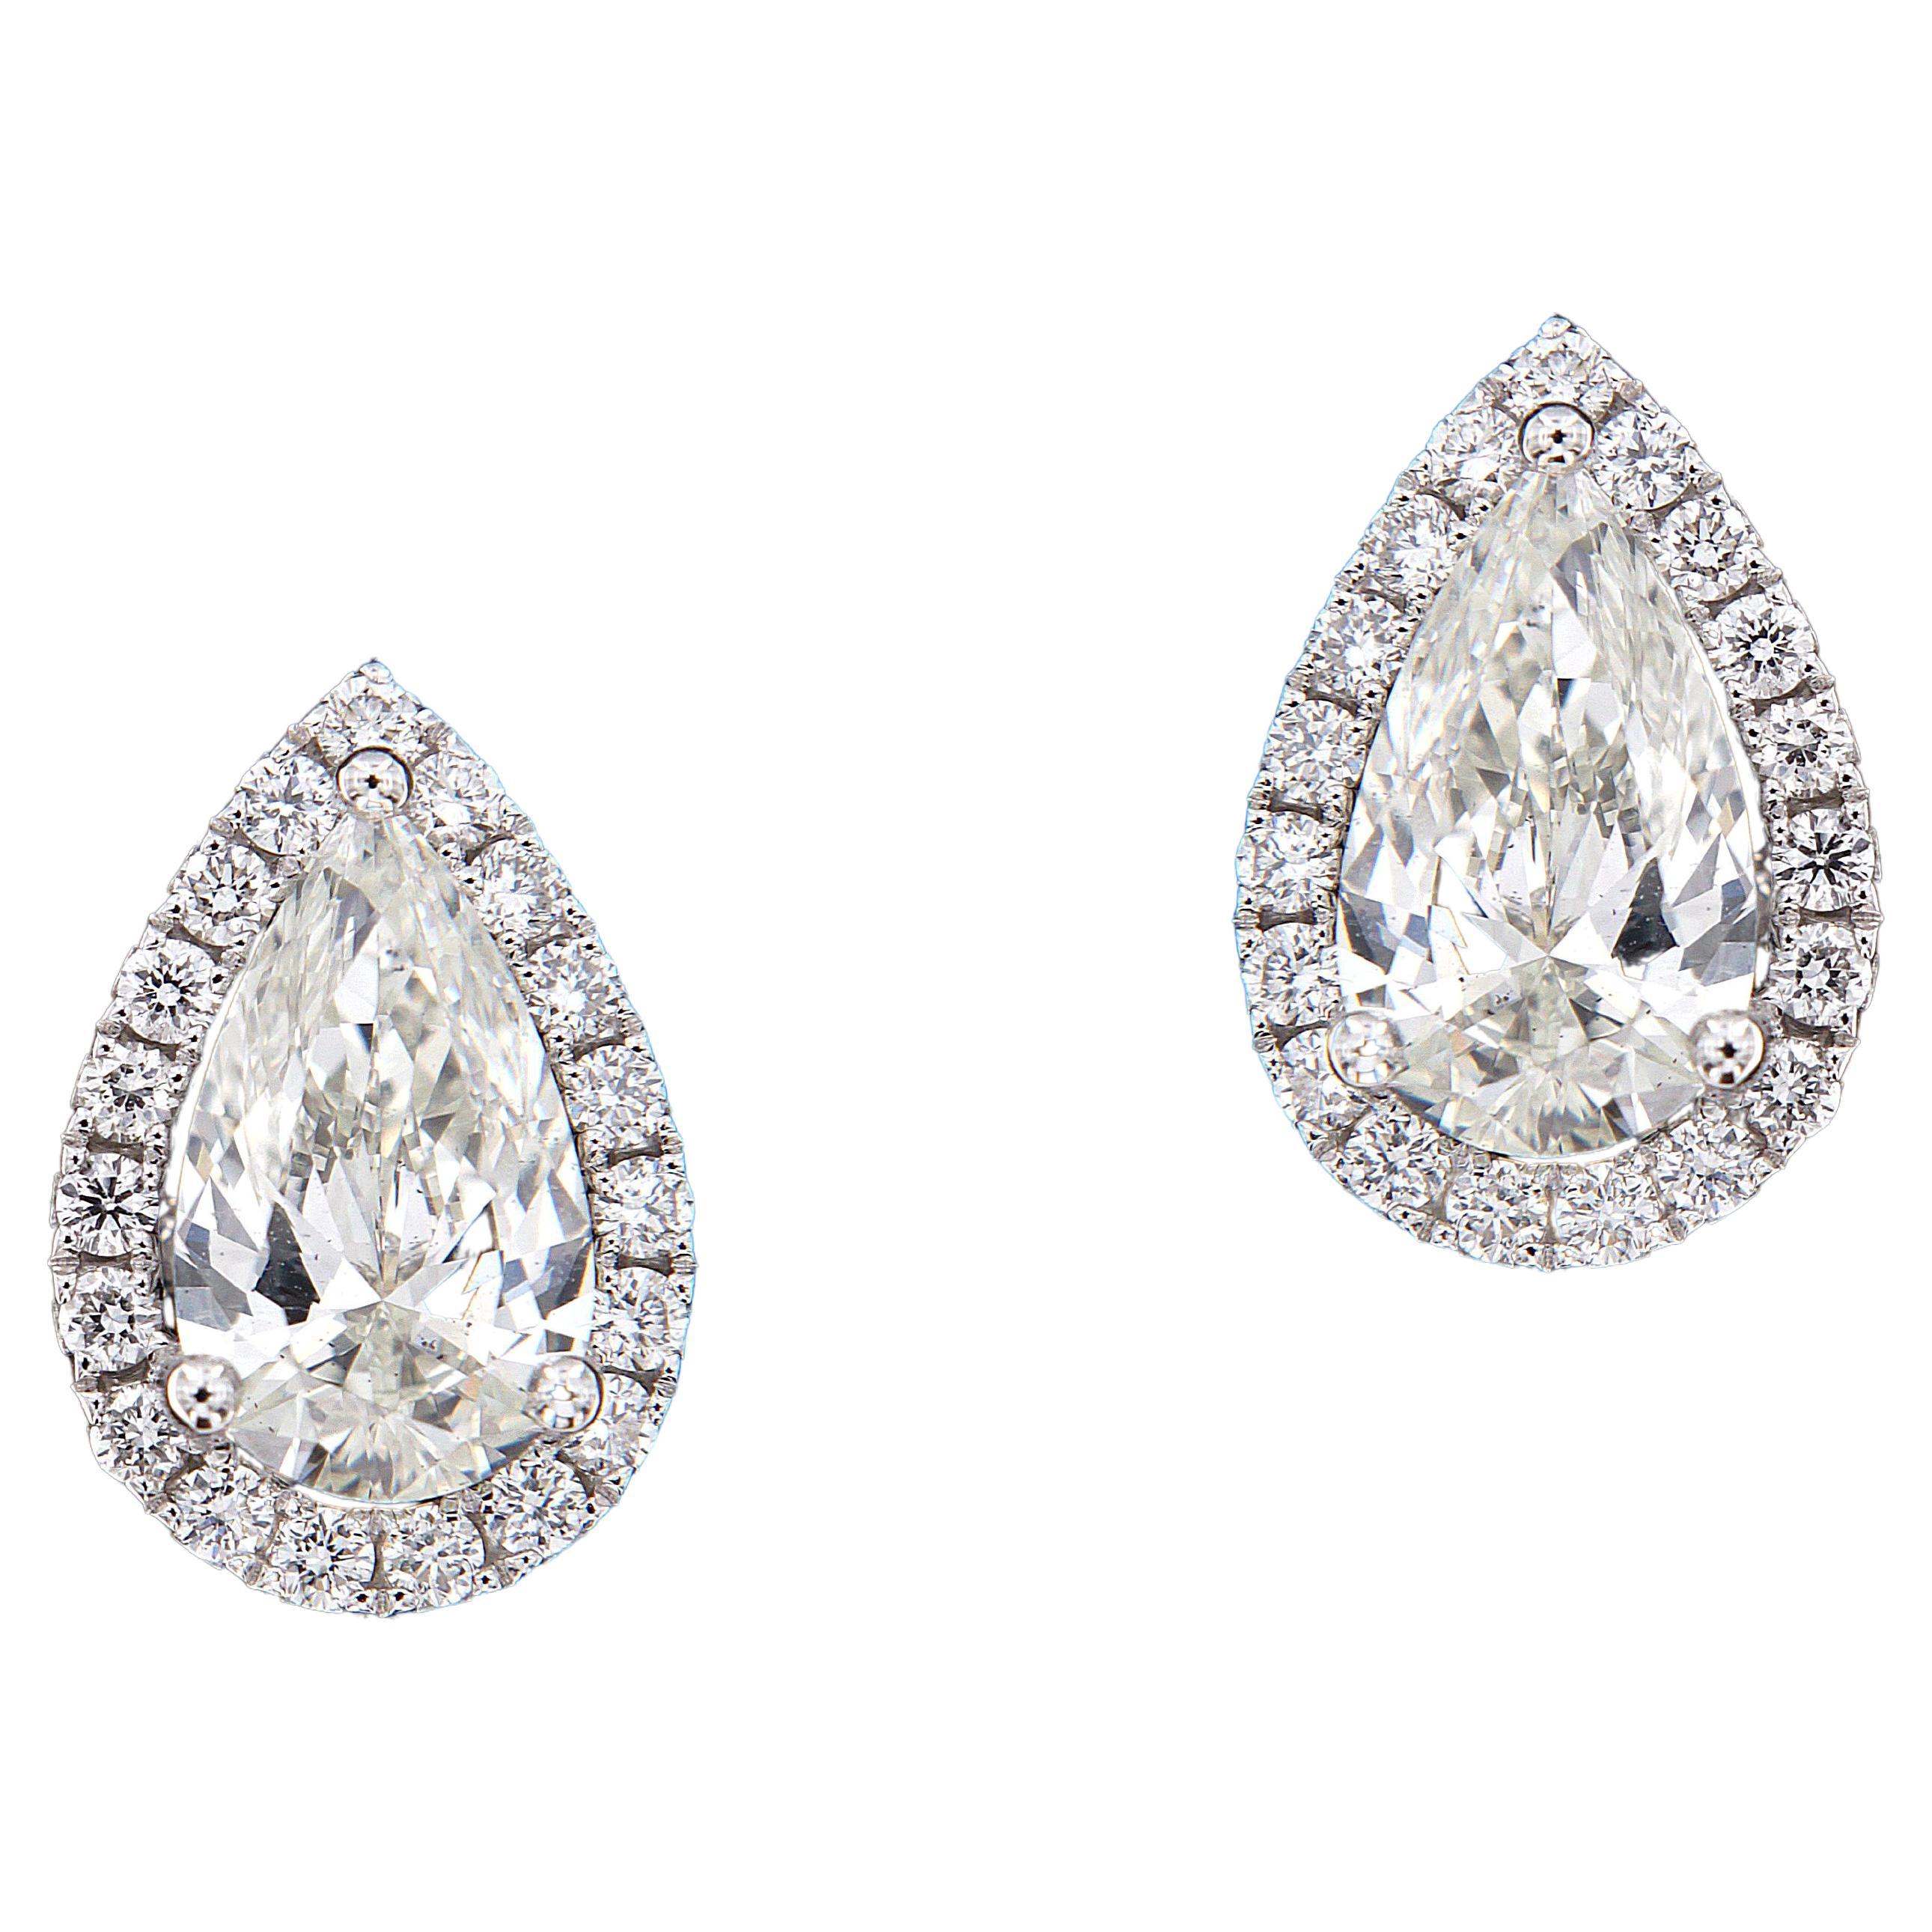 18 Karat White Gold and Diamond in Pear Shaped Earrings